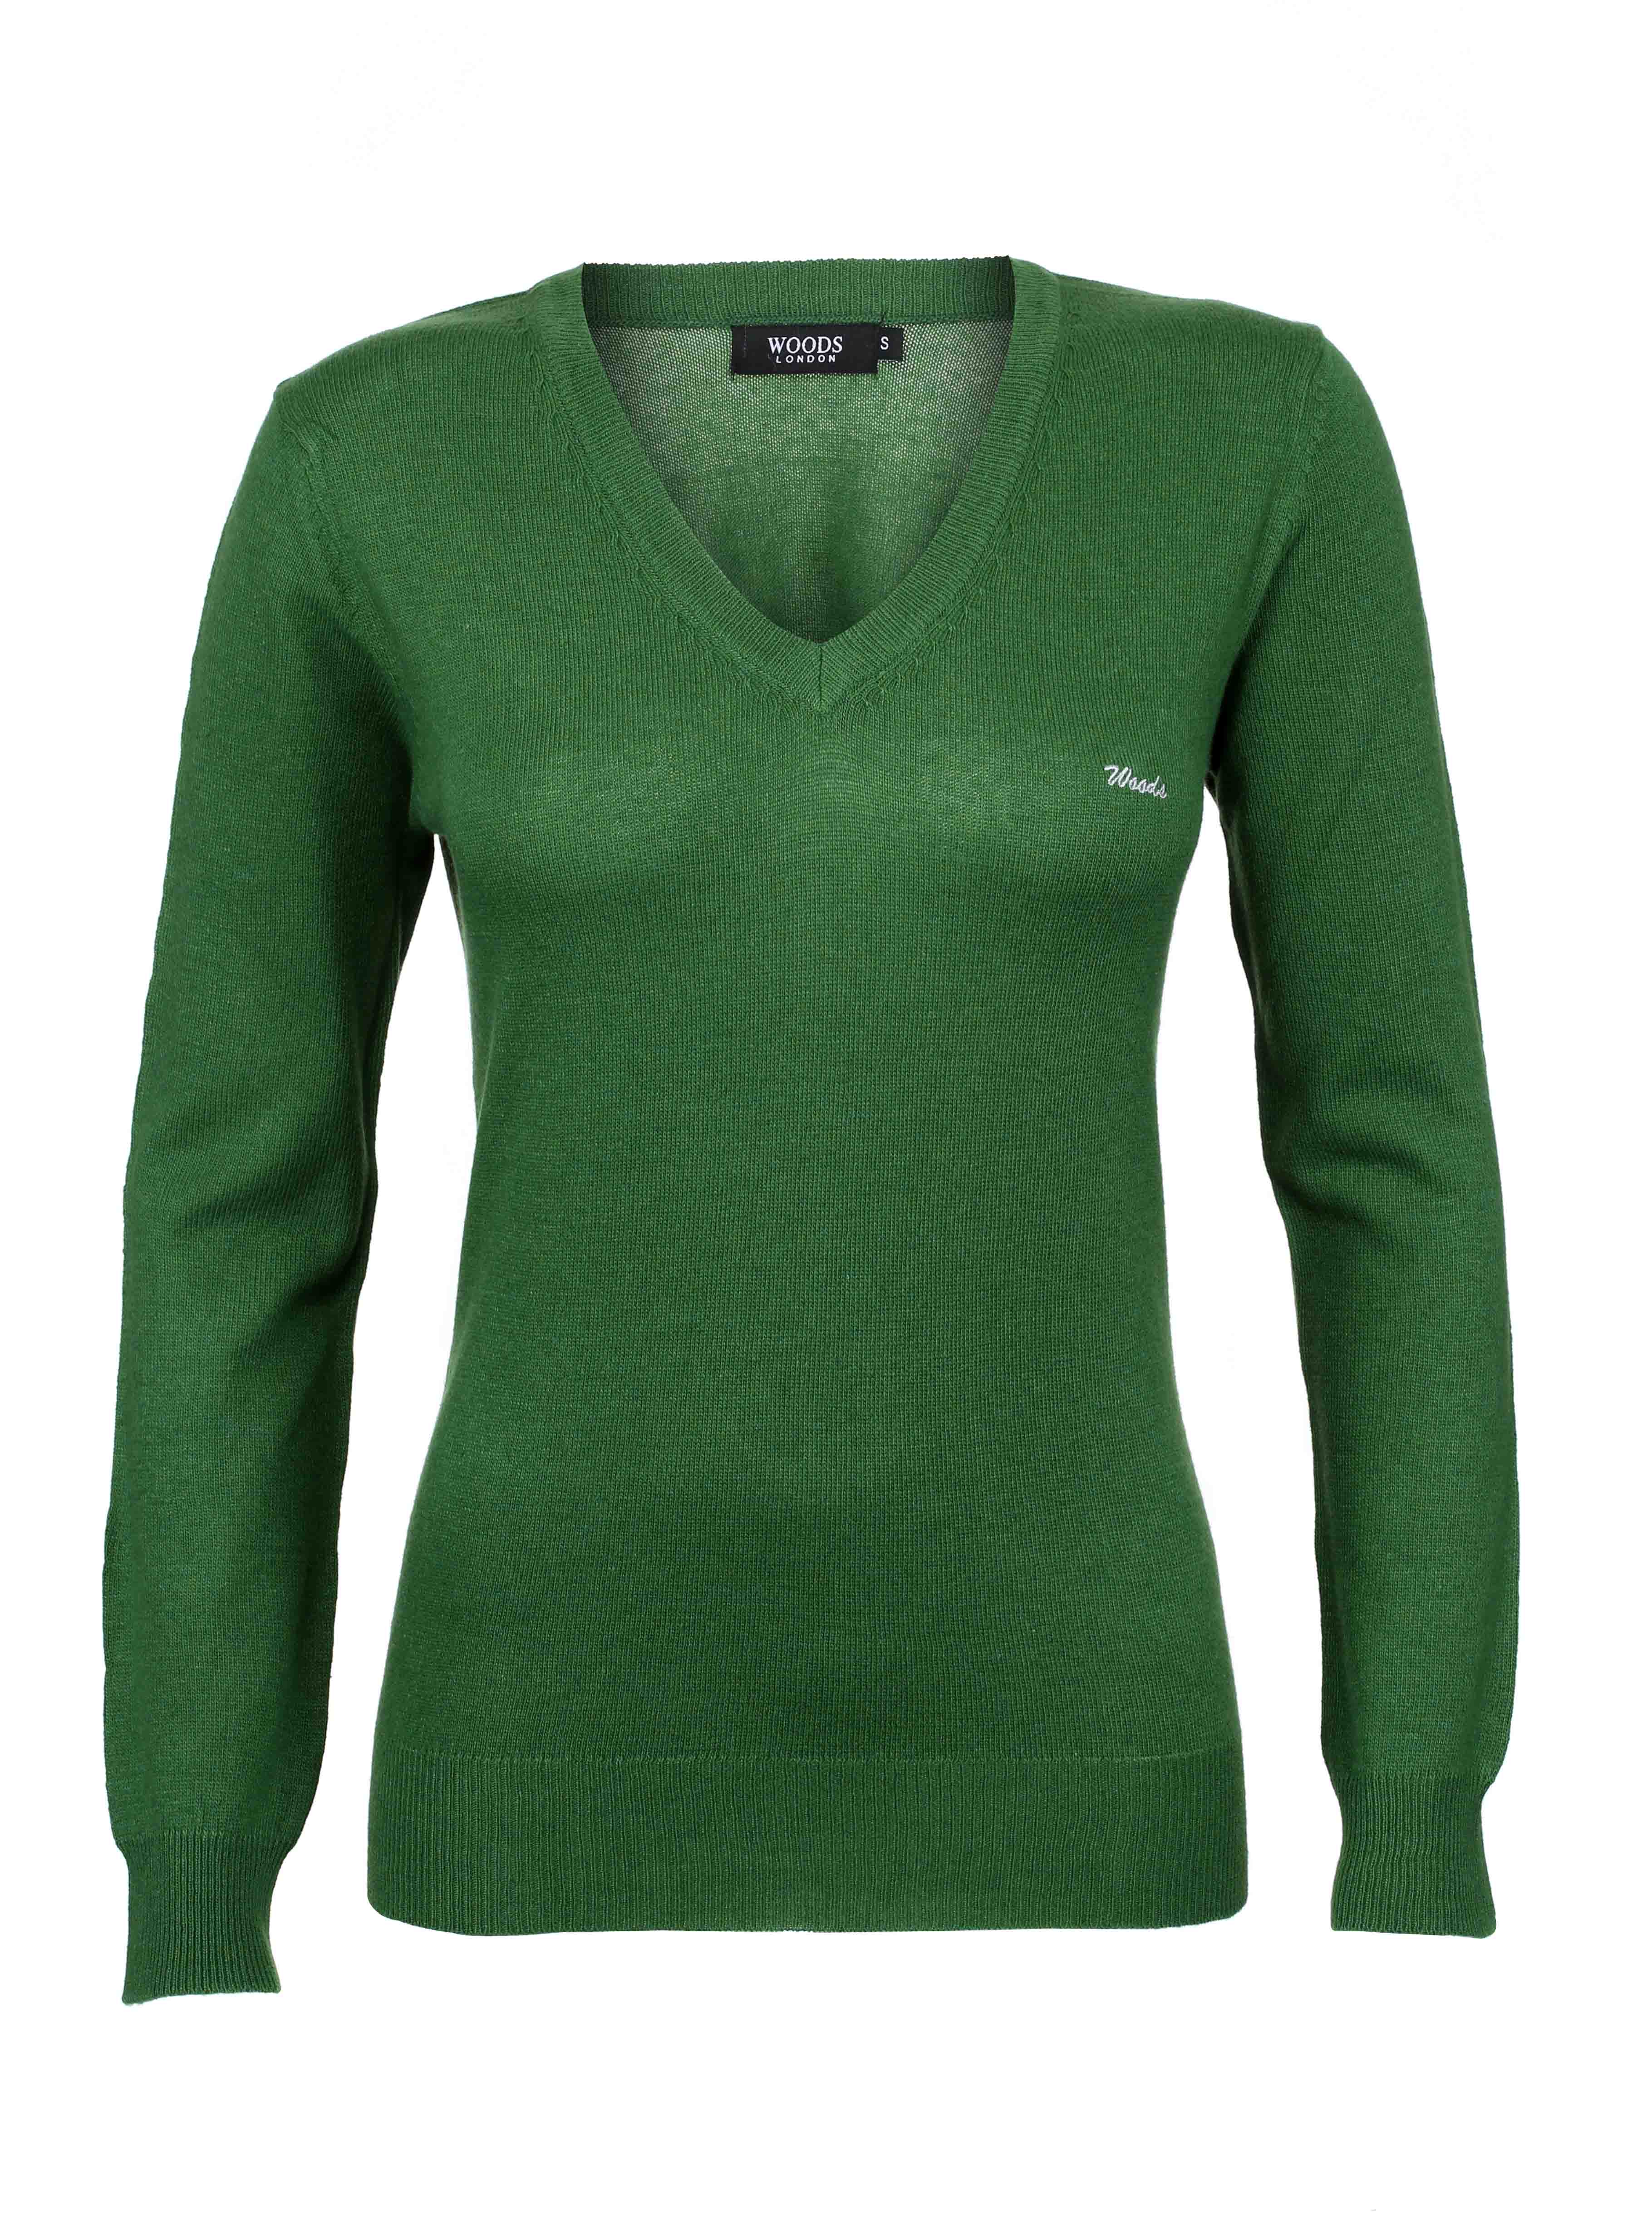 women-v-neck-sweater-from-woodland-1